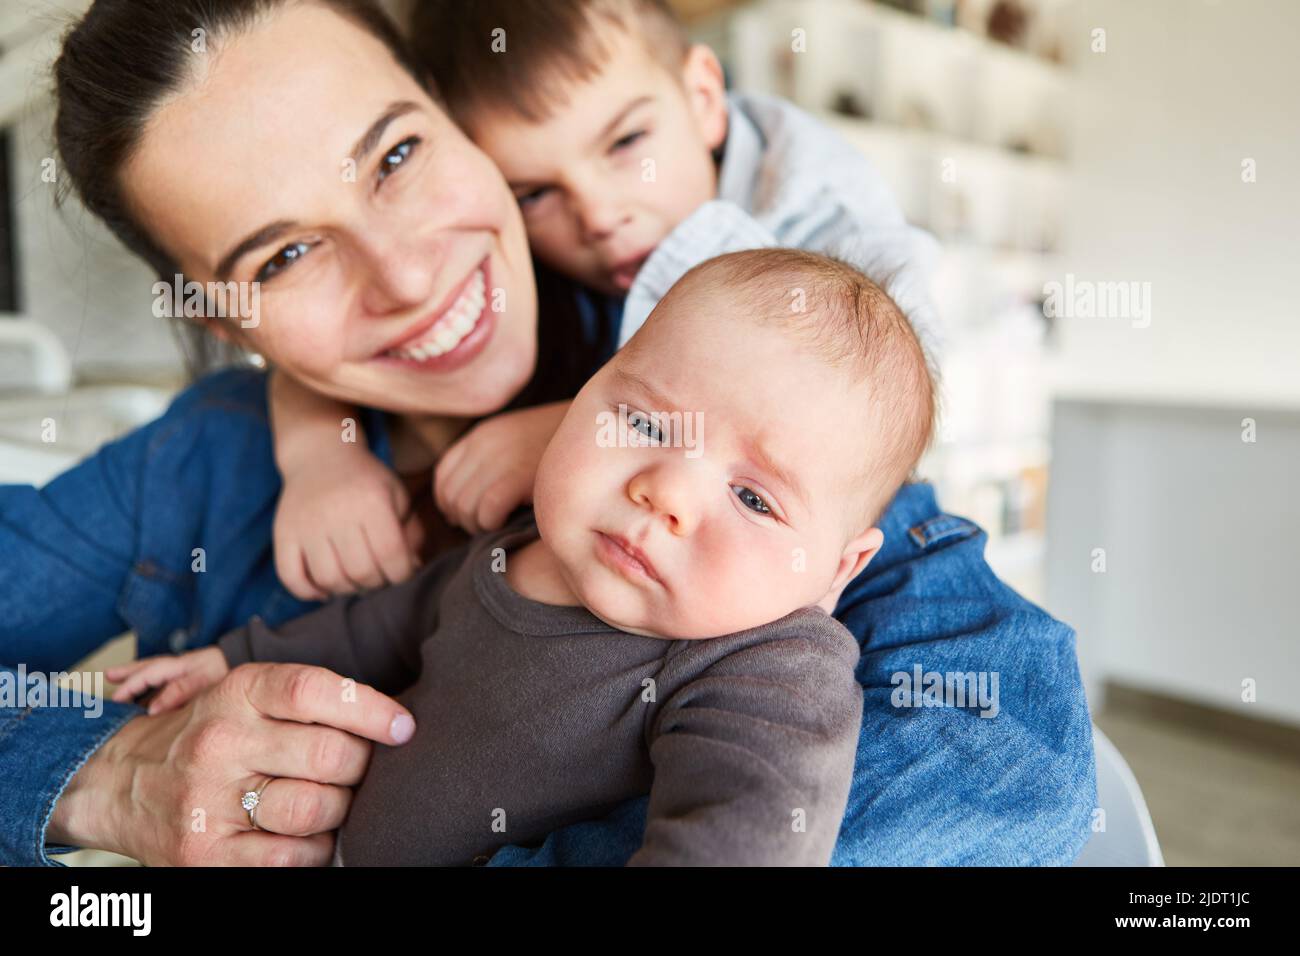 Happy smiling mother with baby and big brother cuddling together at home Stock Photo